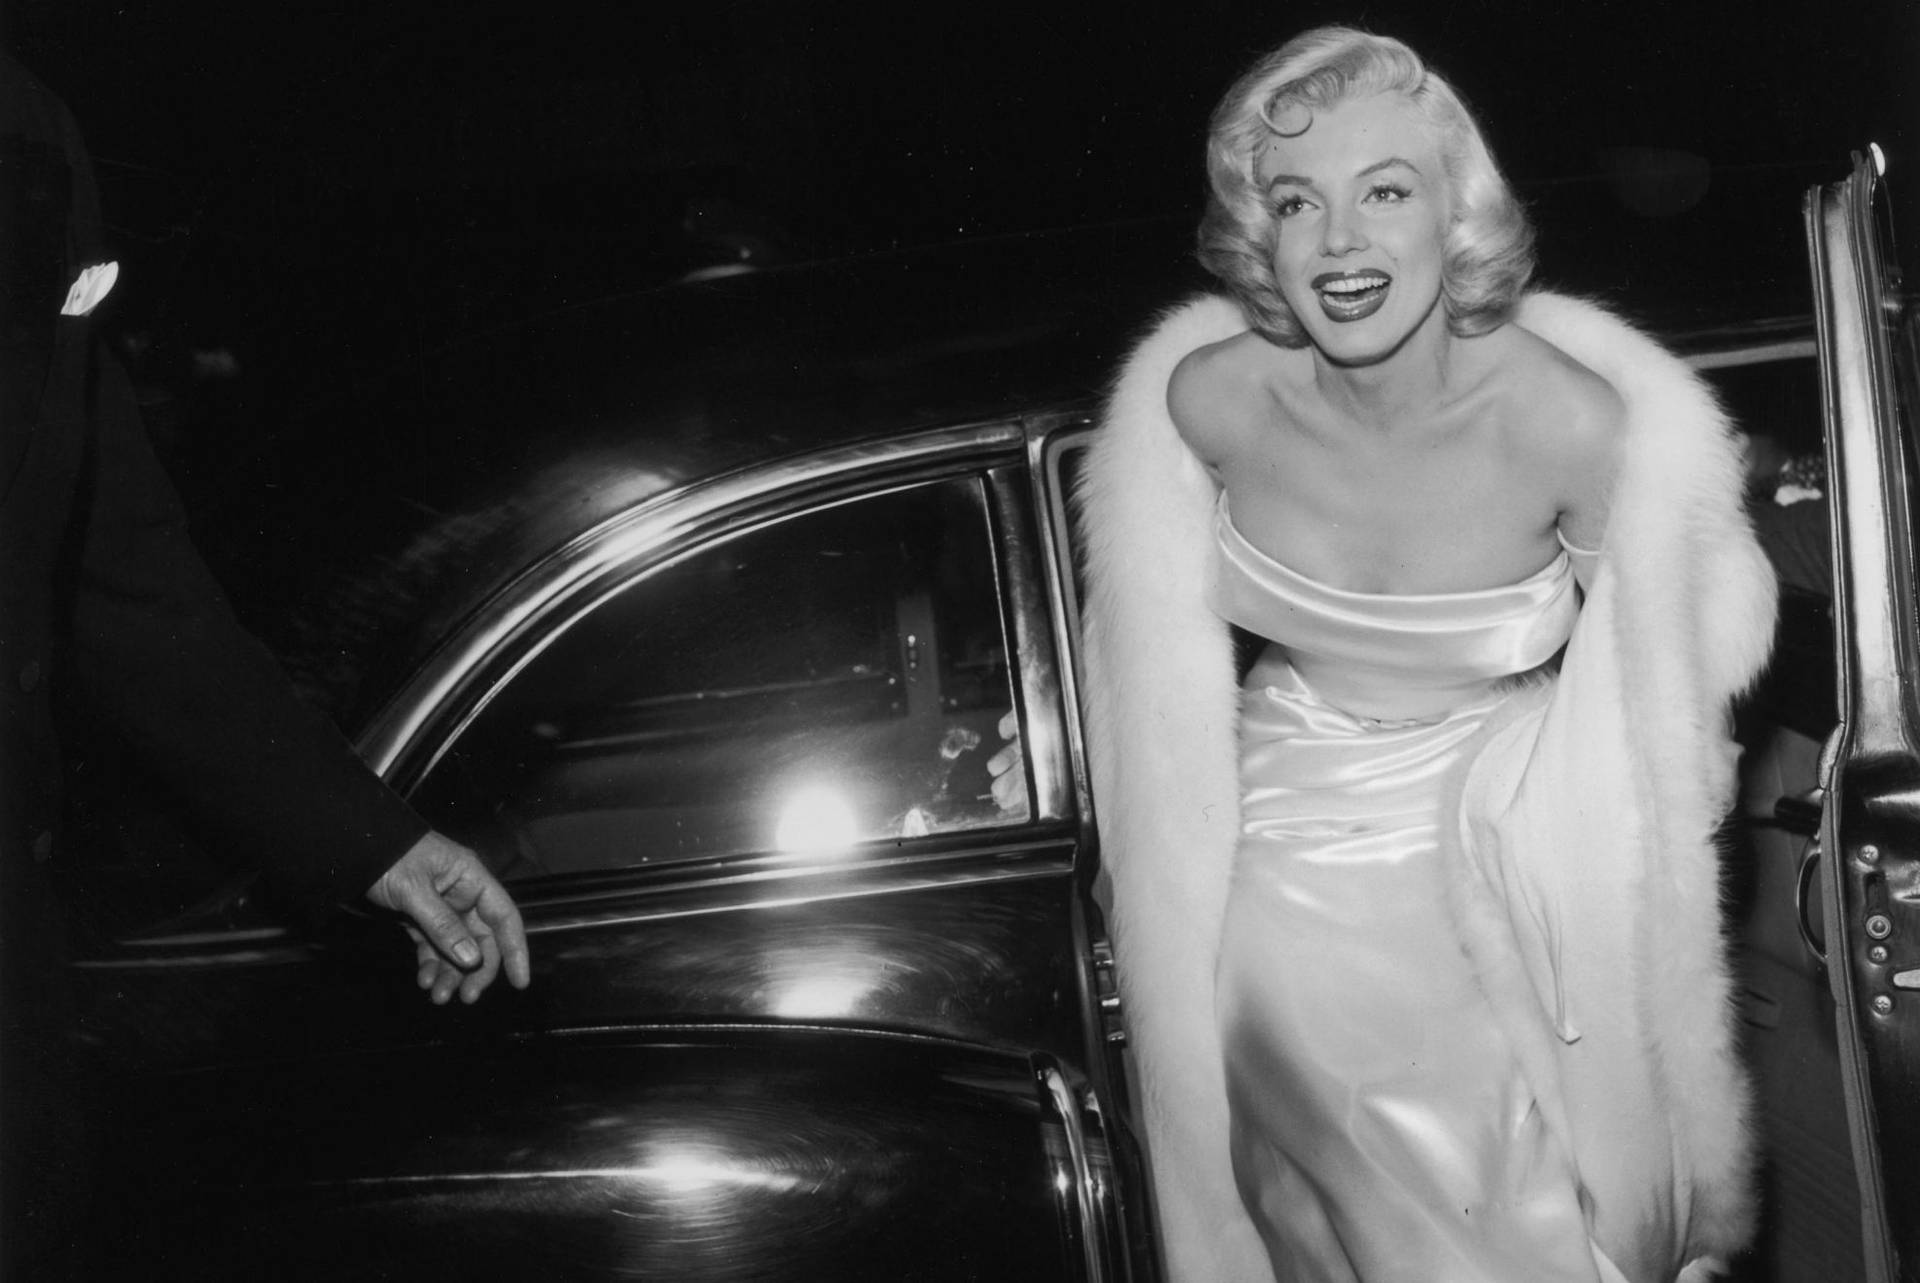 Marilynmonroe Ur Bilen (as A Potential Title Or Caption For The Wallpaper Image) Wallpaper